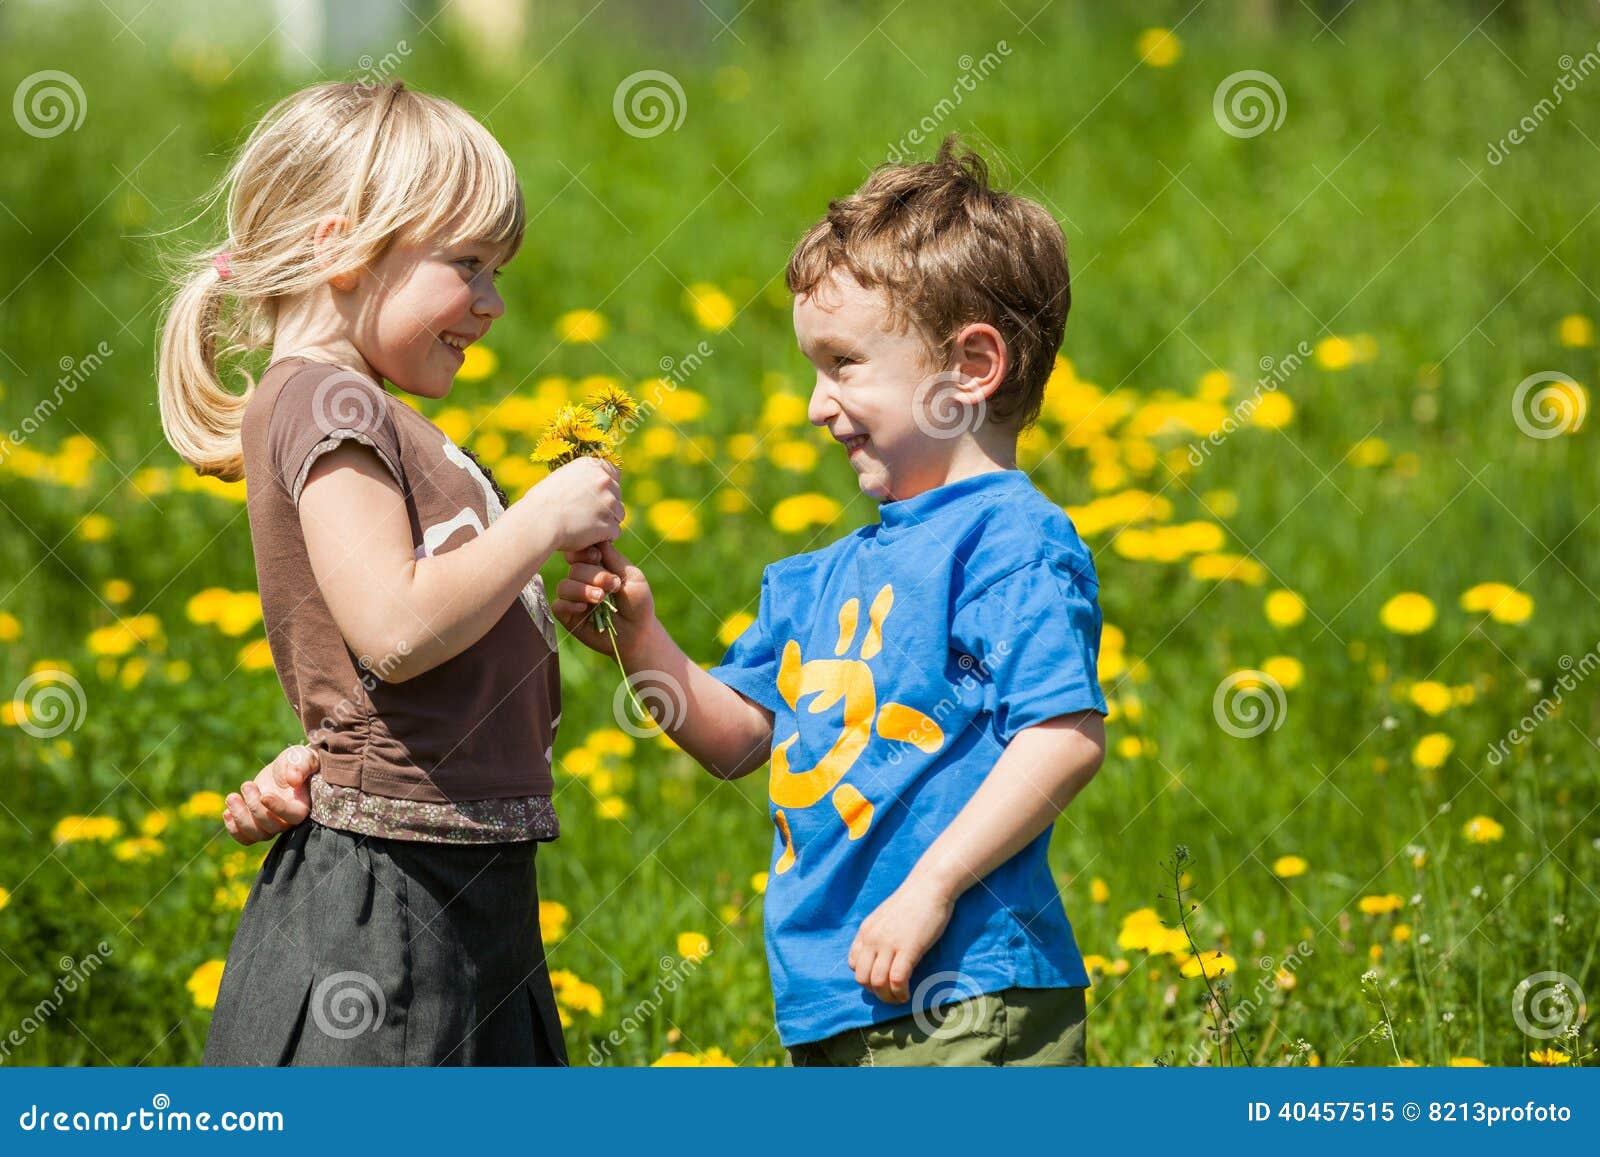  Boy  Giving Flowers For A Girl  Stock Photo Image 40457515